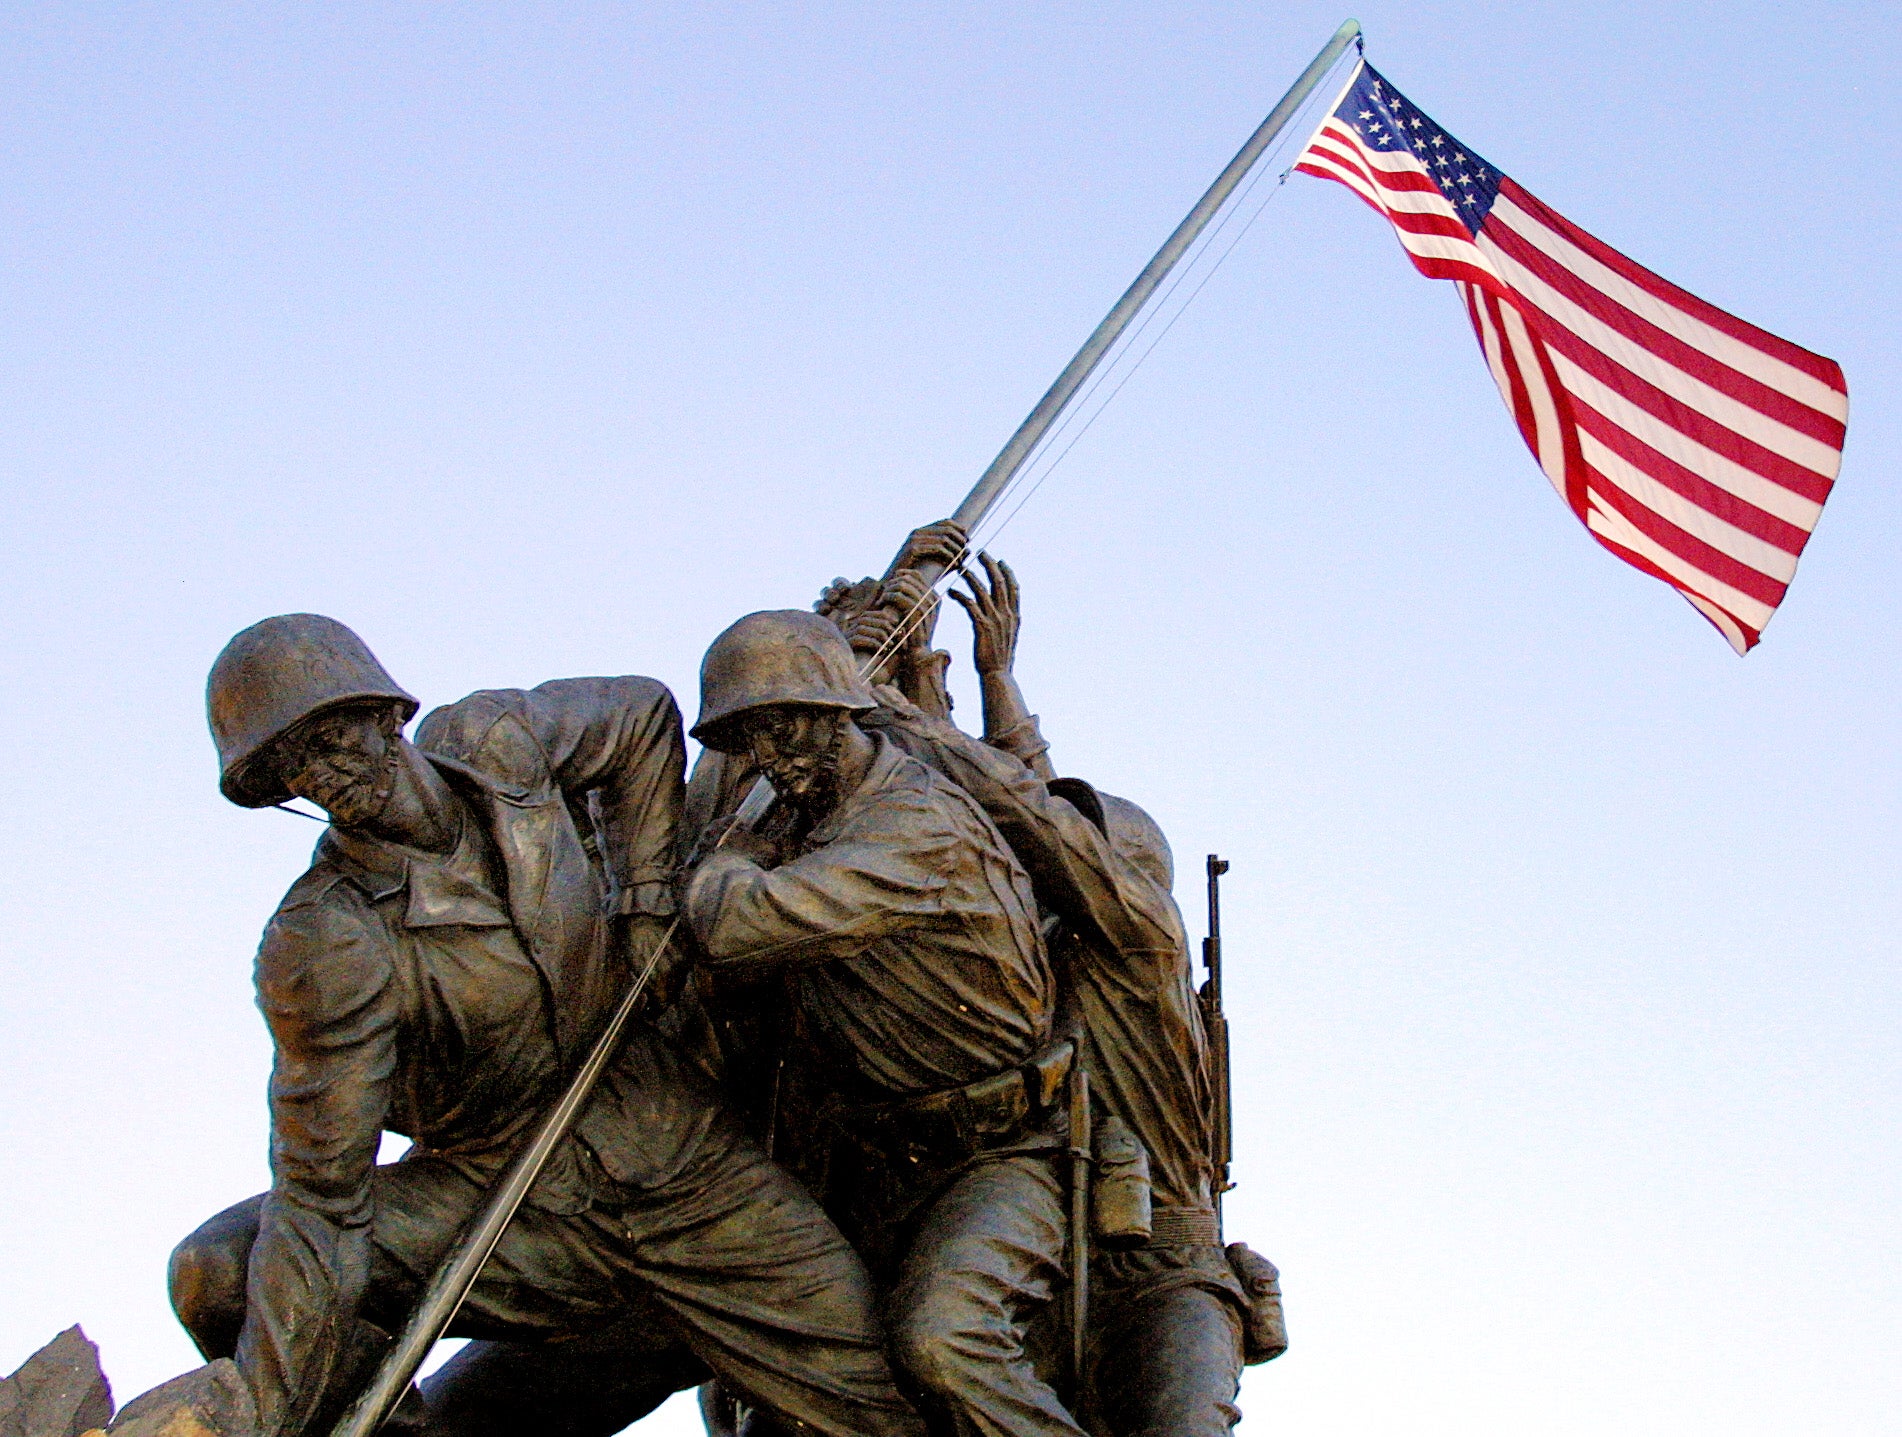 The American flag flies over the US Marine Memorial in Arlington depicting the flag raising at Iwo Jima during the Second World War